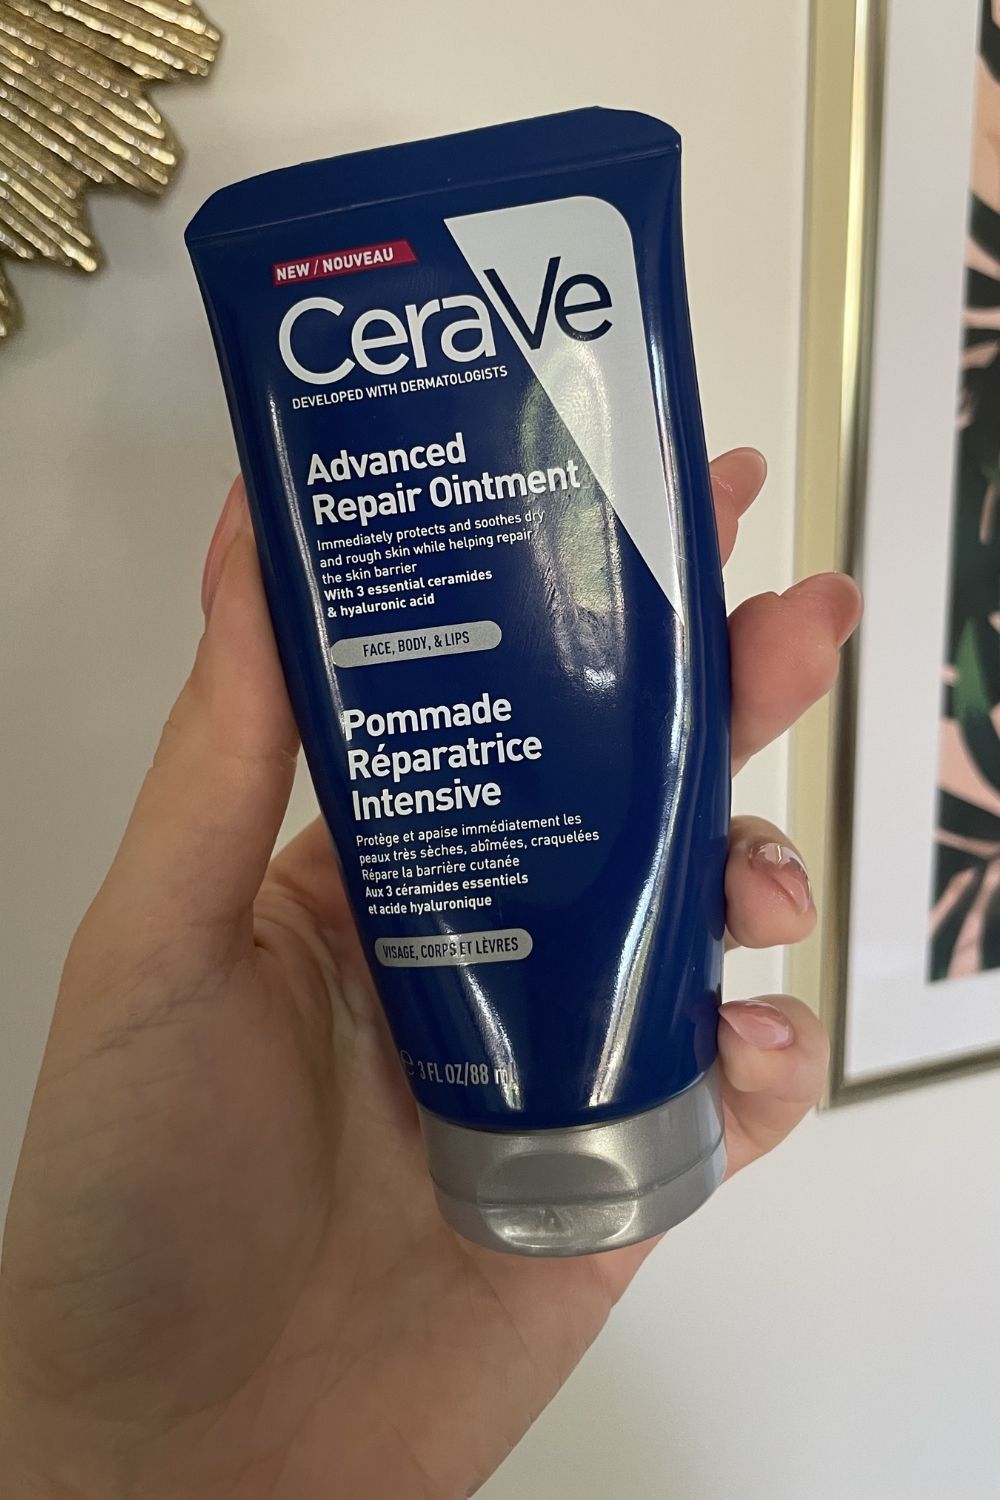 valeza holding the Cerave Advanced Repair Ointment